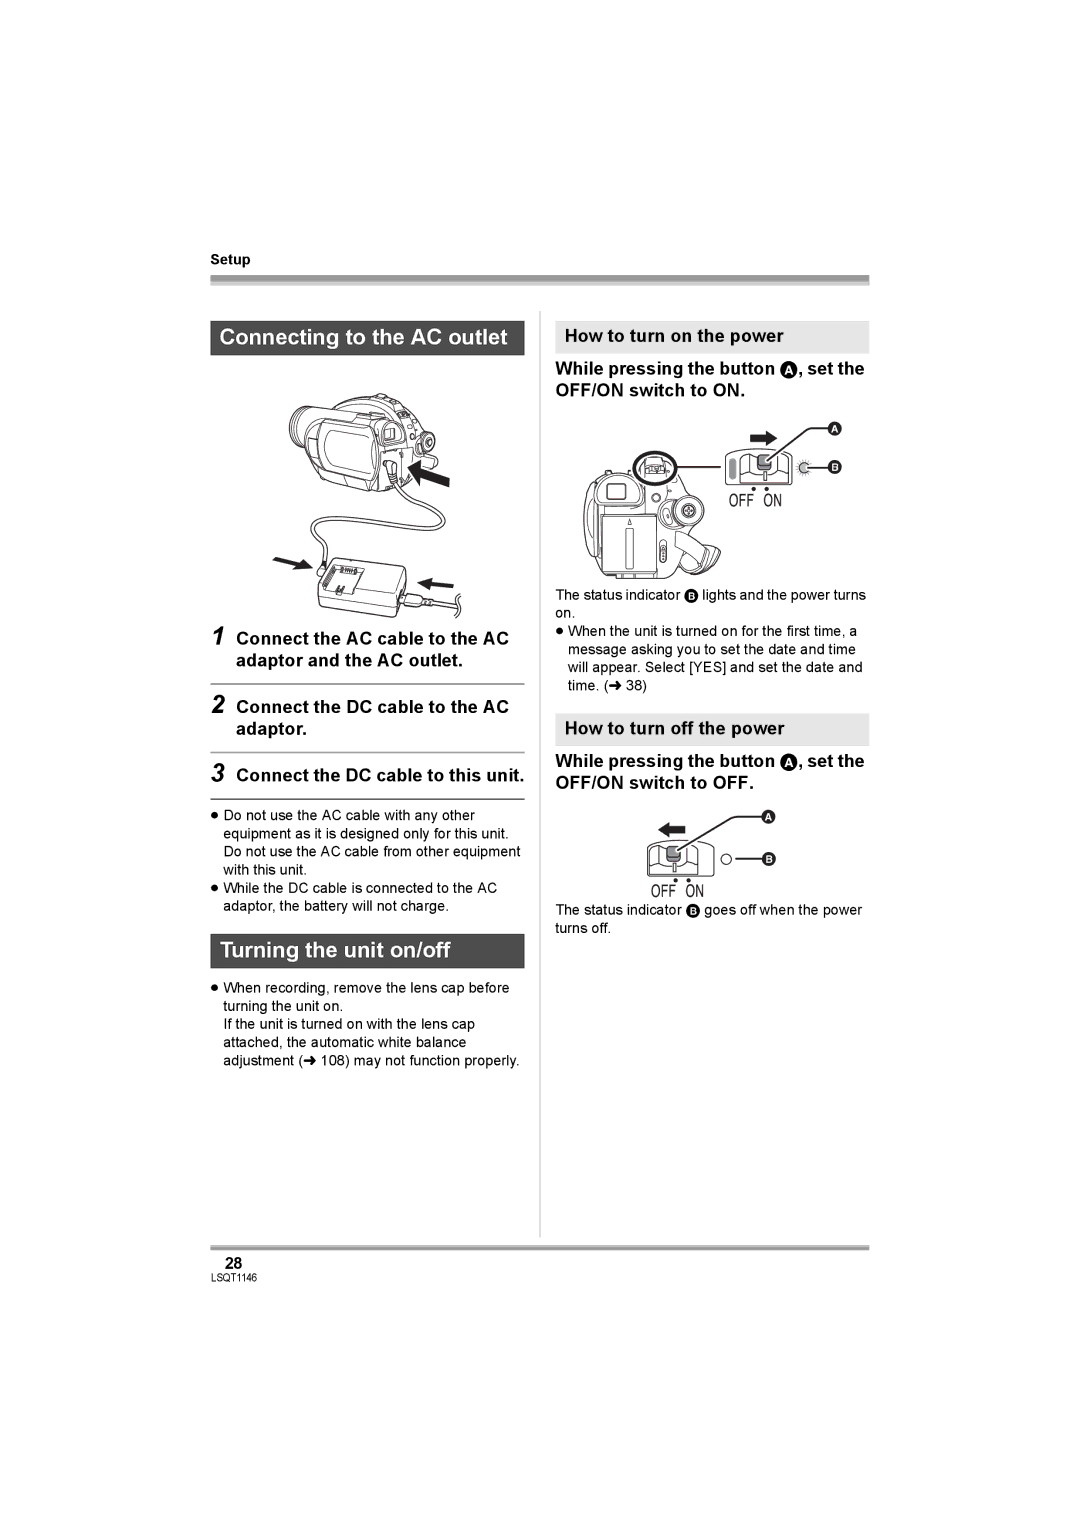 Panasonic VDR-D220 operating instructions Connecting to the AC outlet, Turning the unit on/off 